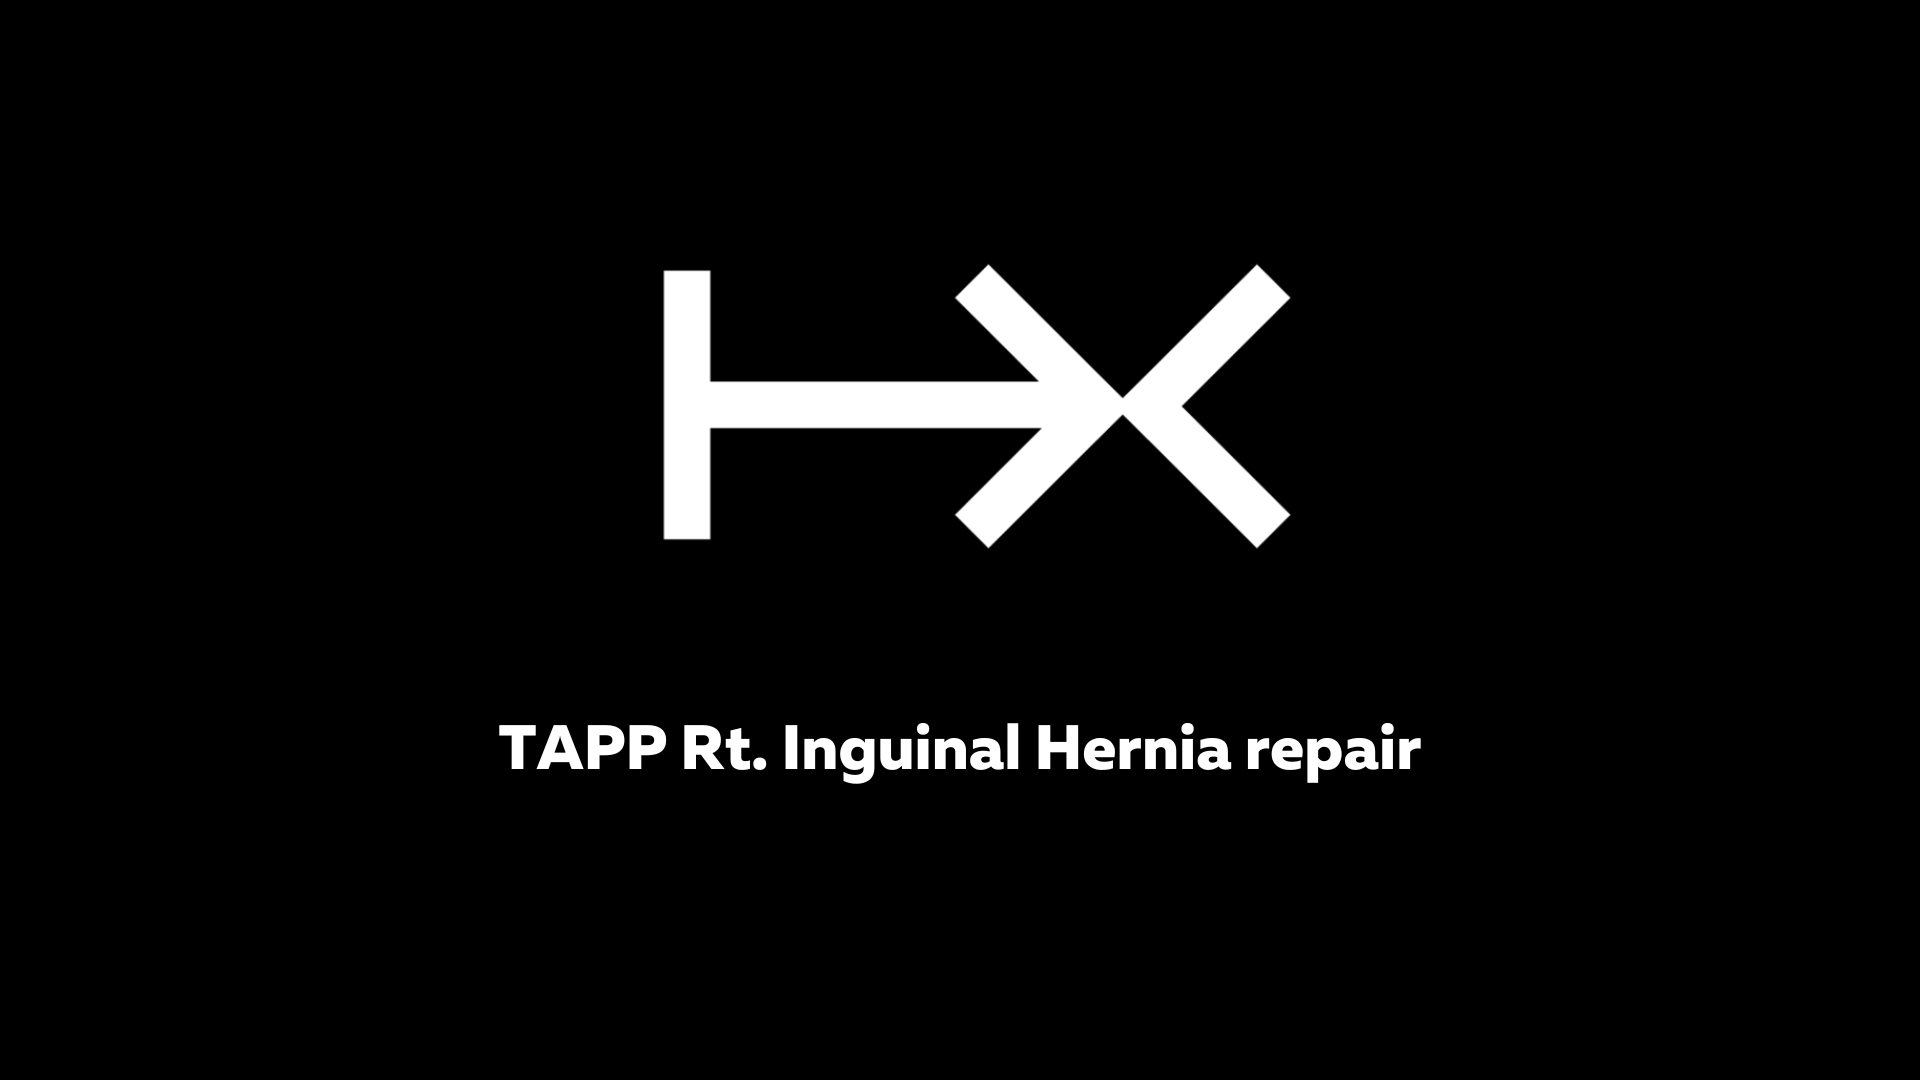 TAPP Rt. Inguinal Hernia repair With fully articulated HandX Monopolar Hook and Needle Holder